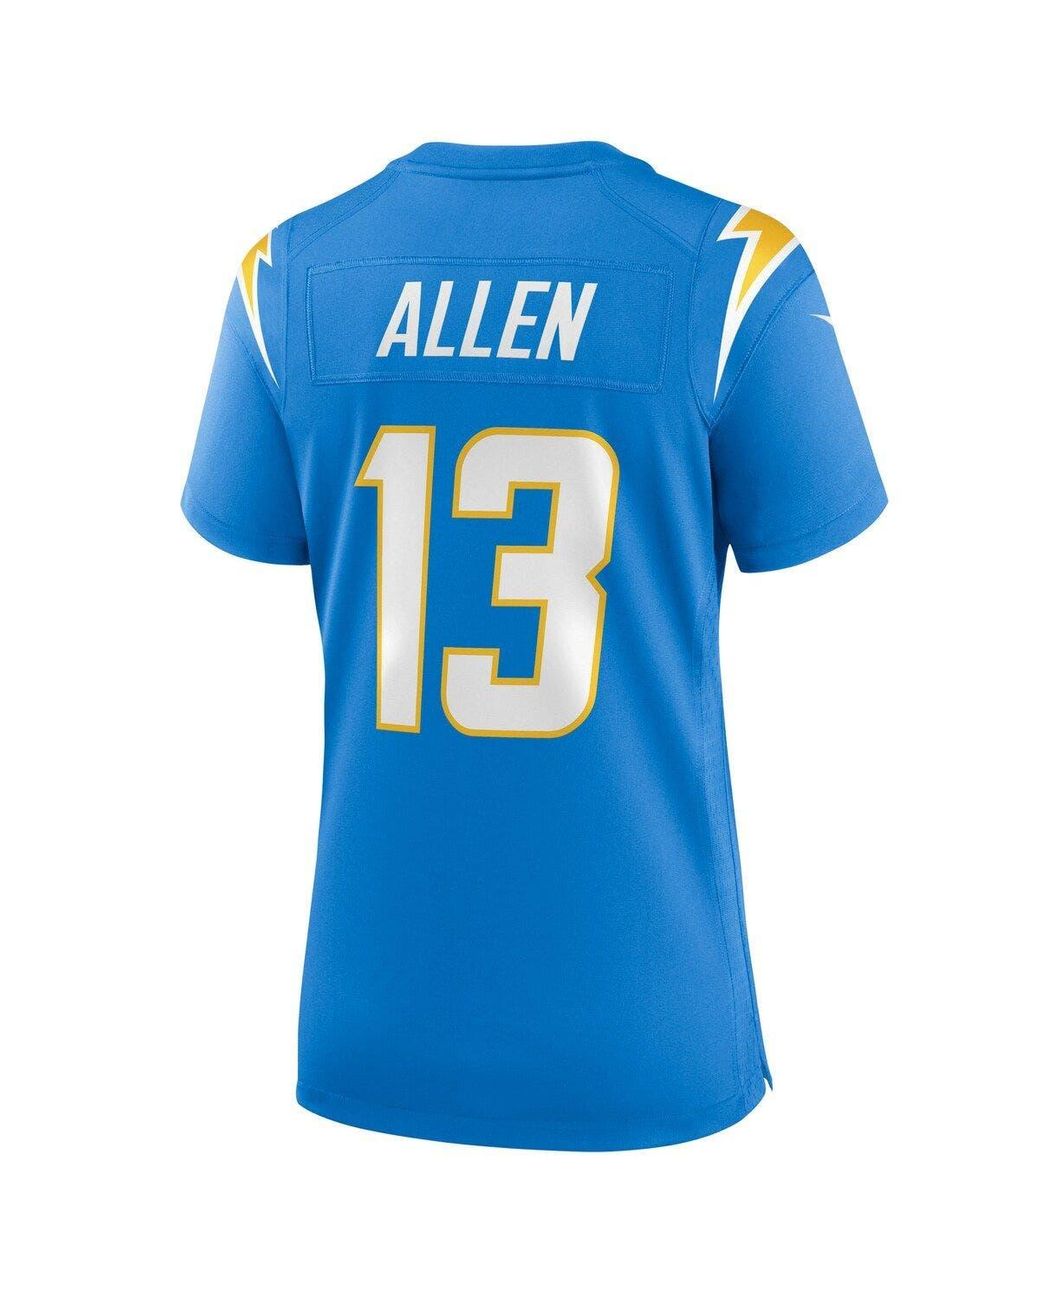 Keenan Allen Los Angeles Chargers Nike Game Jersey - White